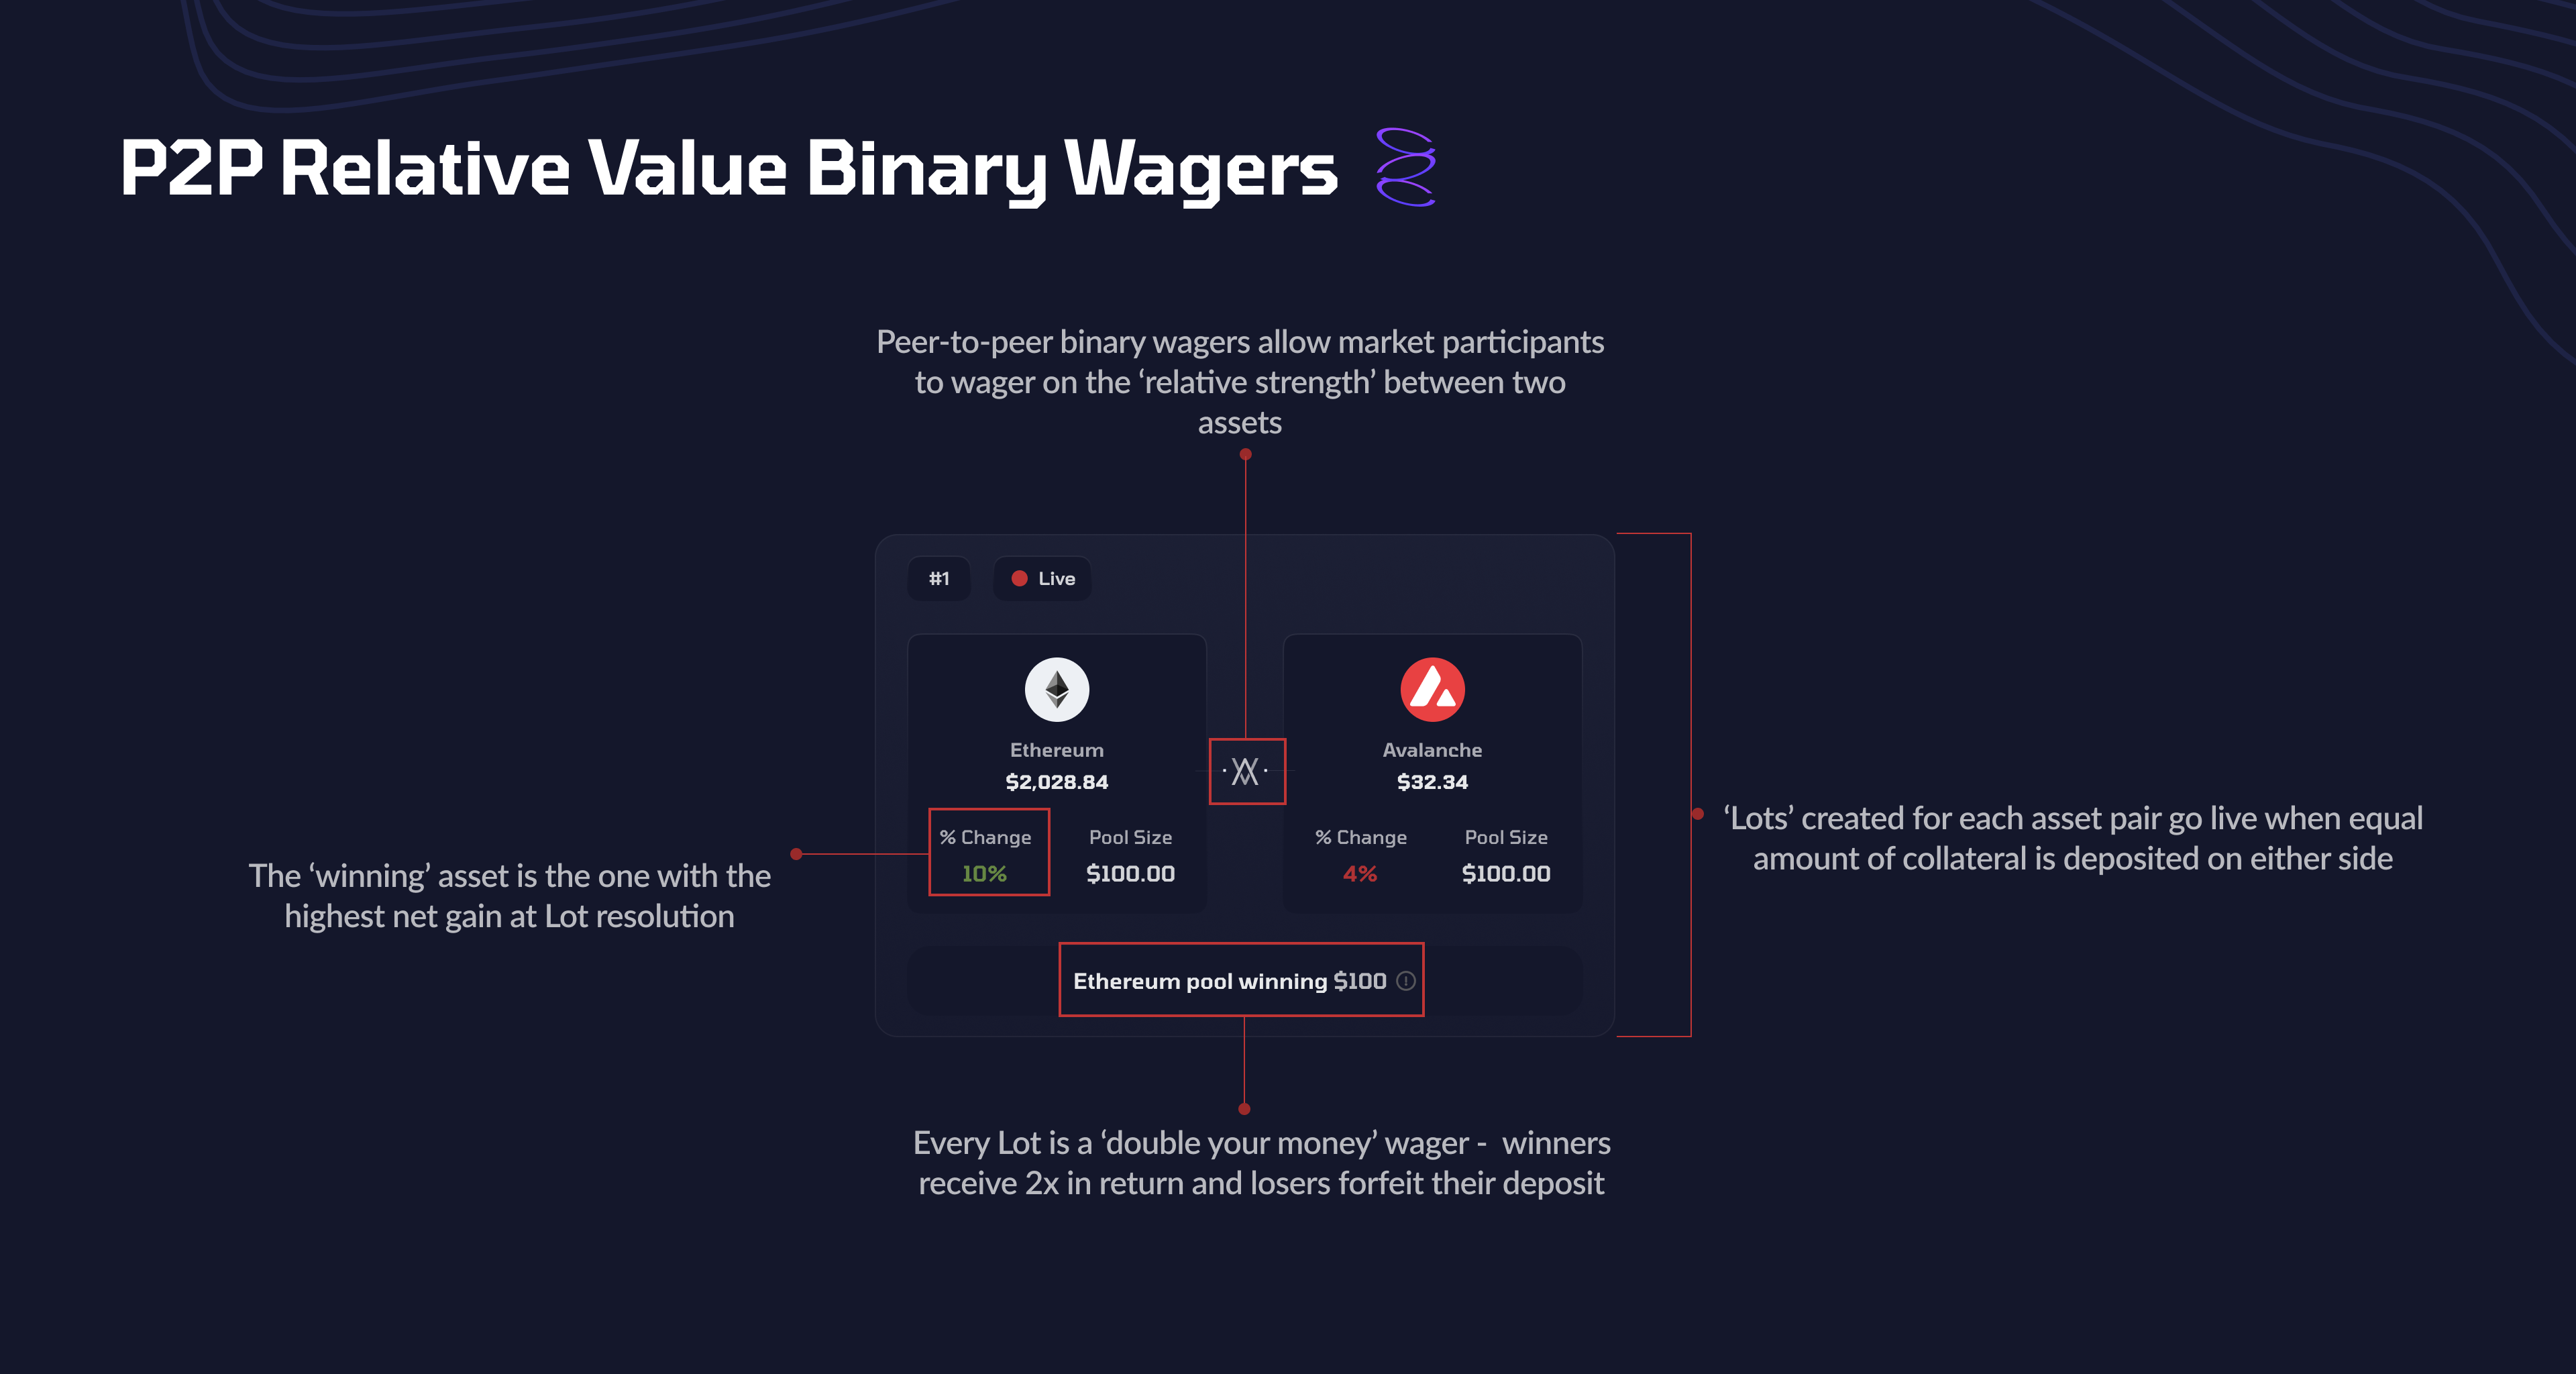 Overview of P2P Relative Value Binary Wager